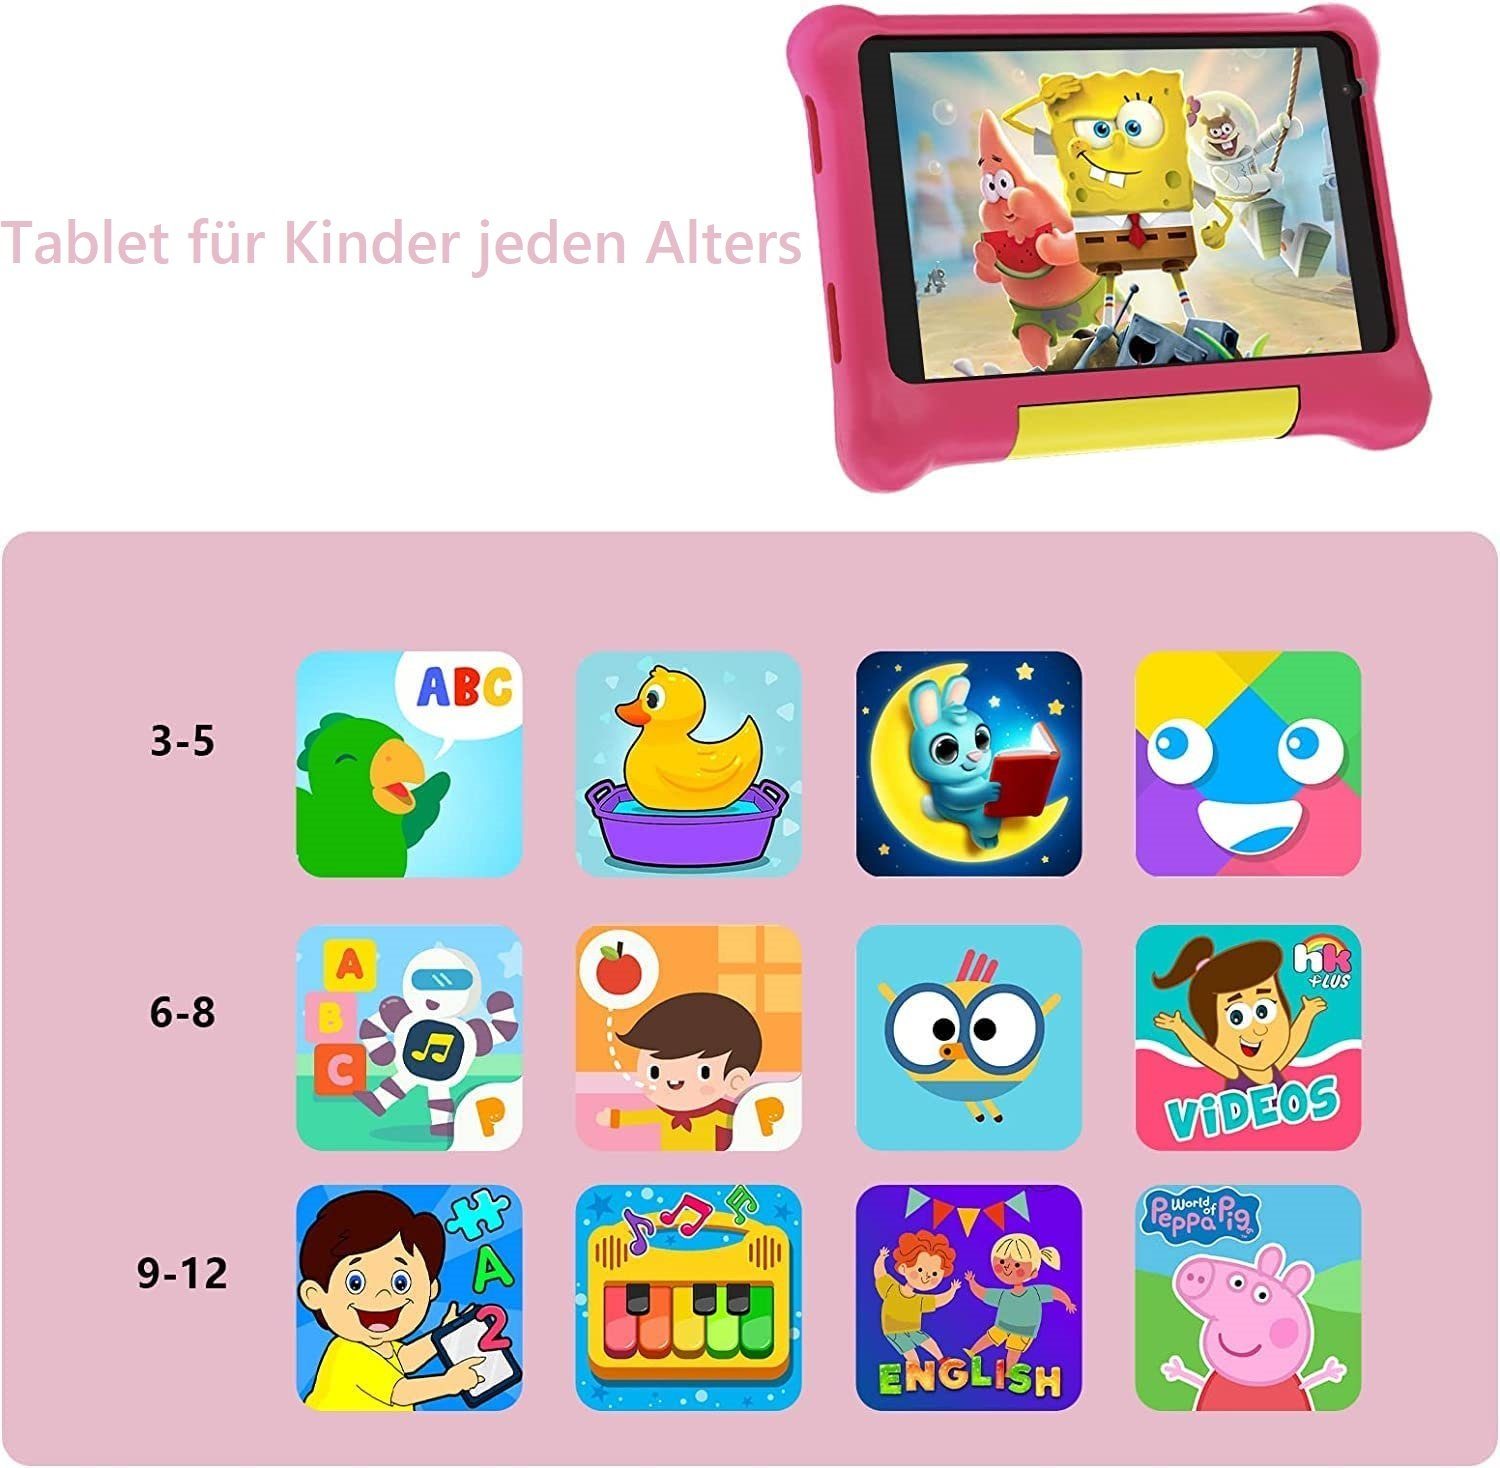 12, (7", kindersicher) GB, Happybe pink Tablet leicht, TK707 32 Android